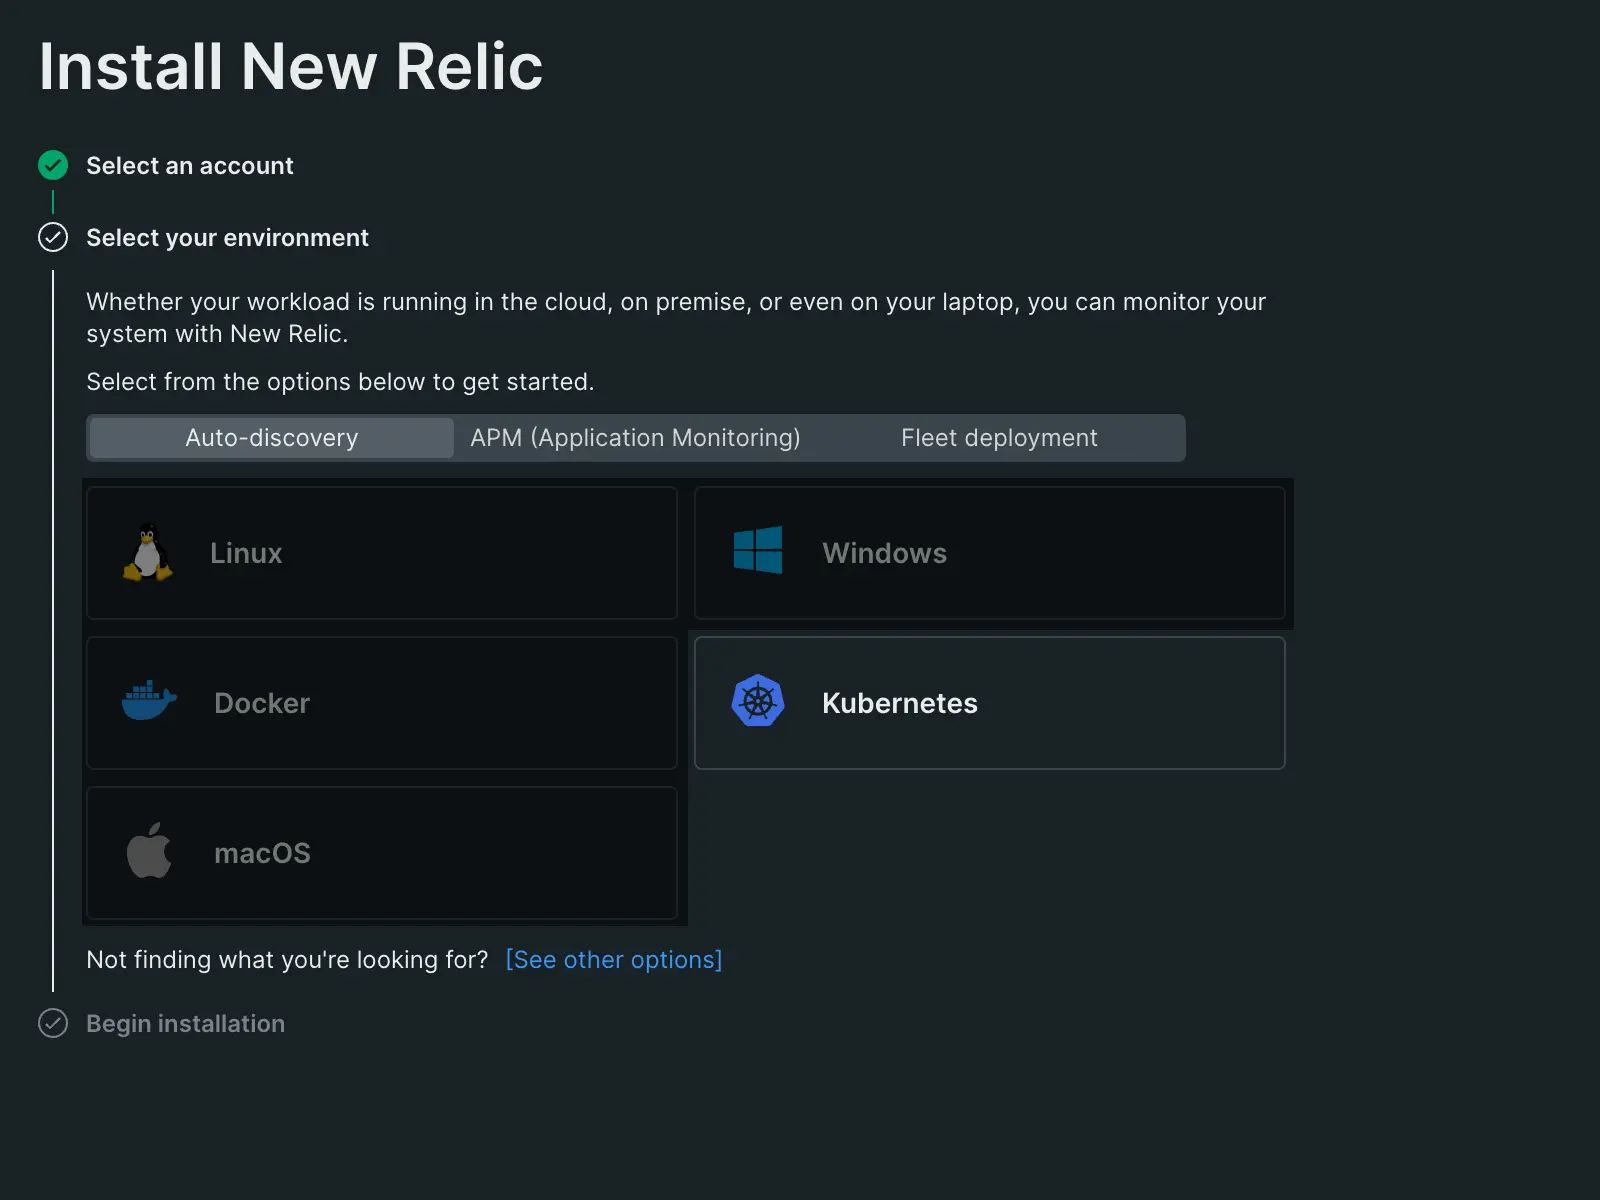 An image displaying New Relic's guided installation for Kubernetes